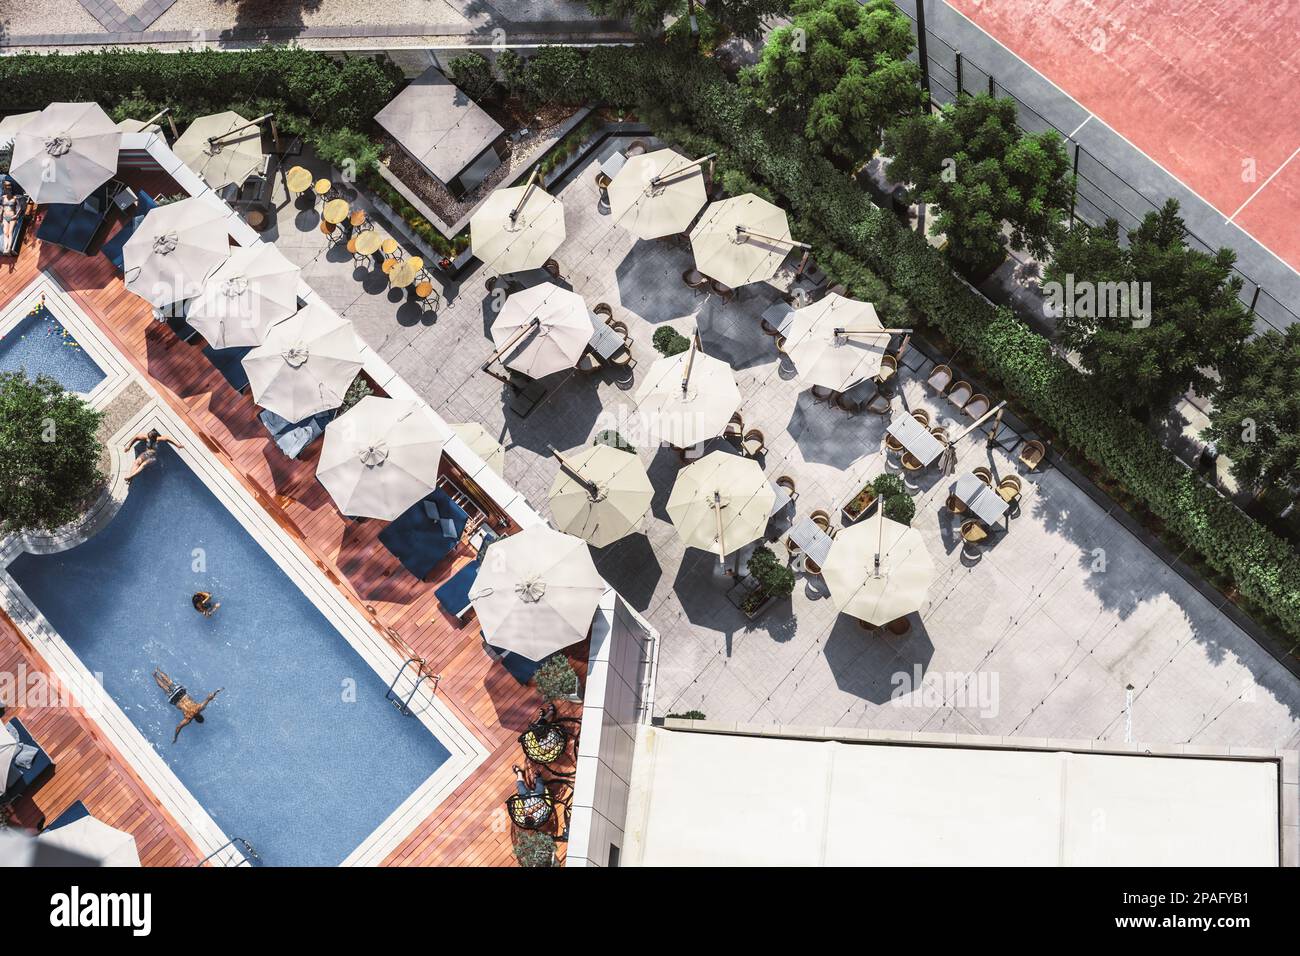 Shot from a drone, an outdoor bar with multiple open sunshades forms a nice landscape. Adjacent to the terrace lies a lush garden, while the other sid Stock Photo